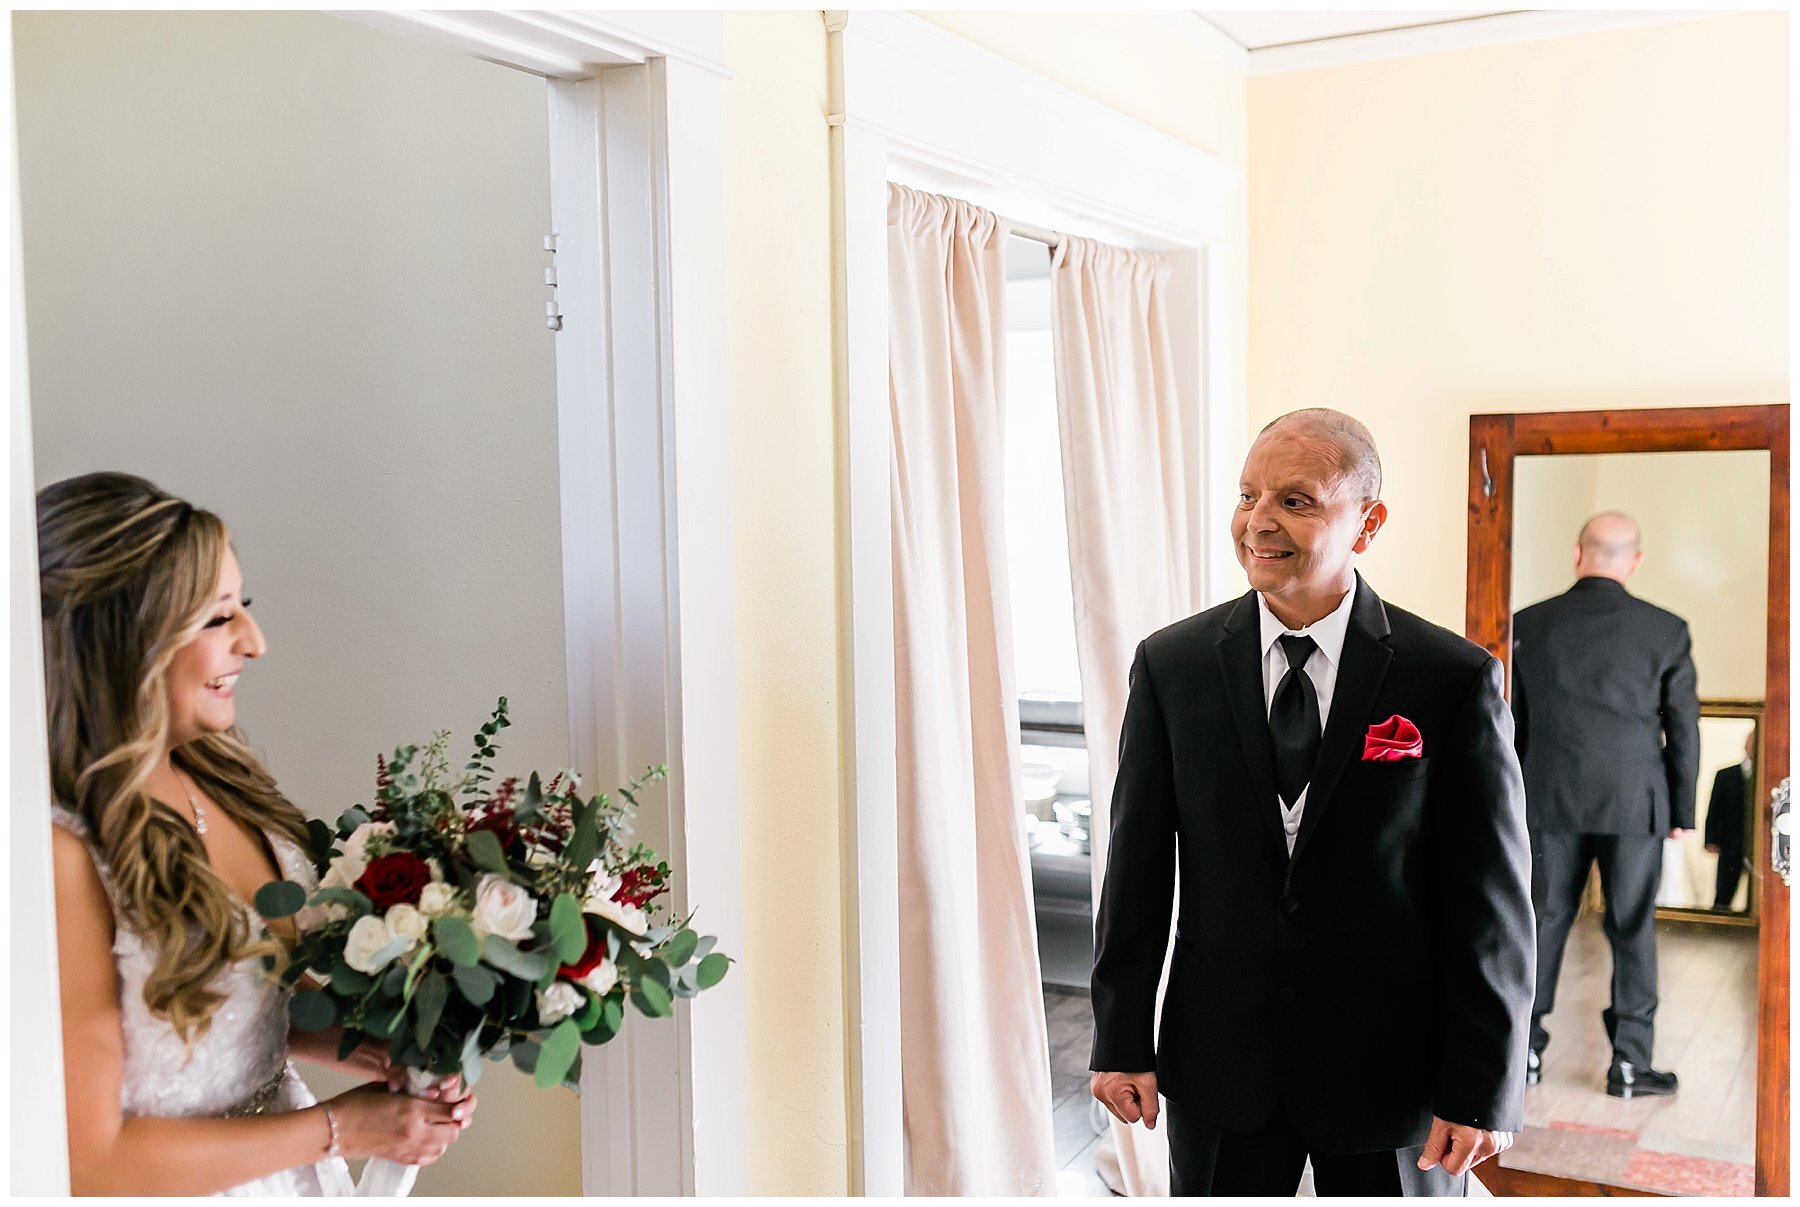  father seeing bride for the first time 